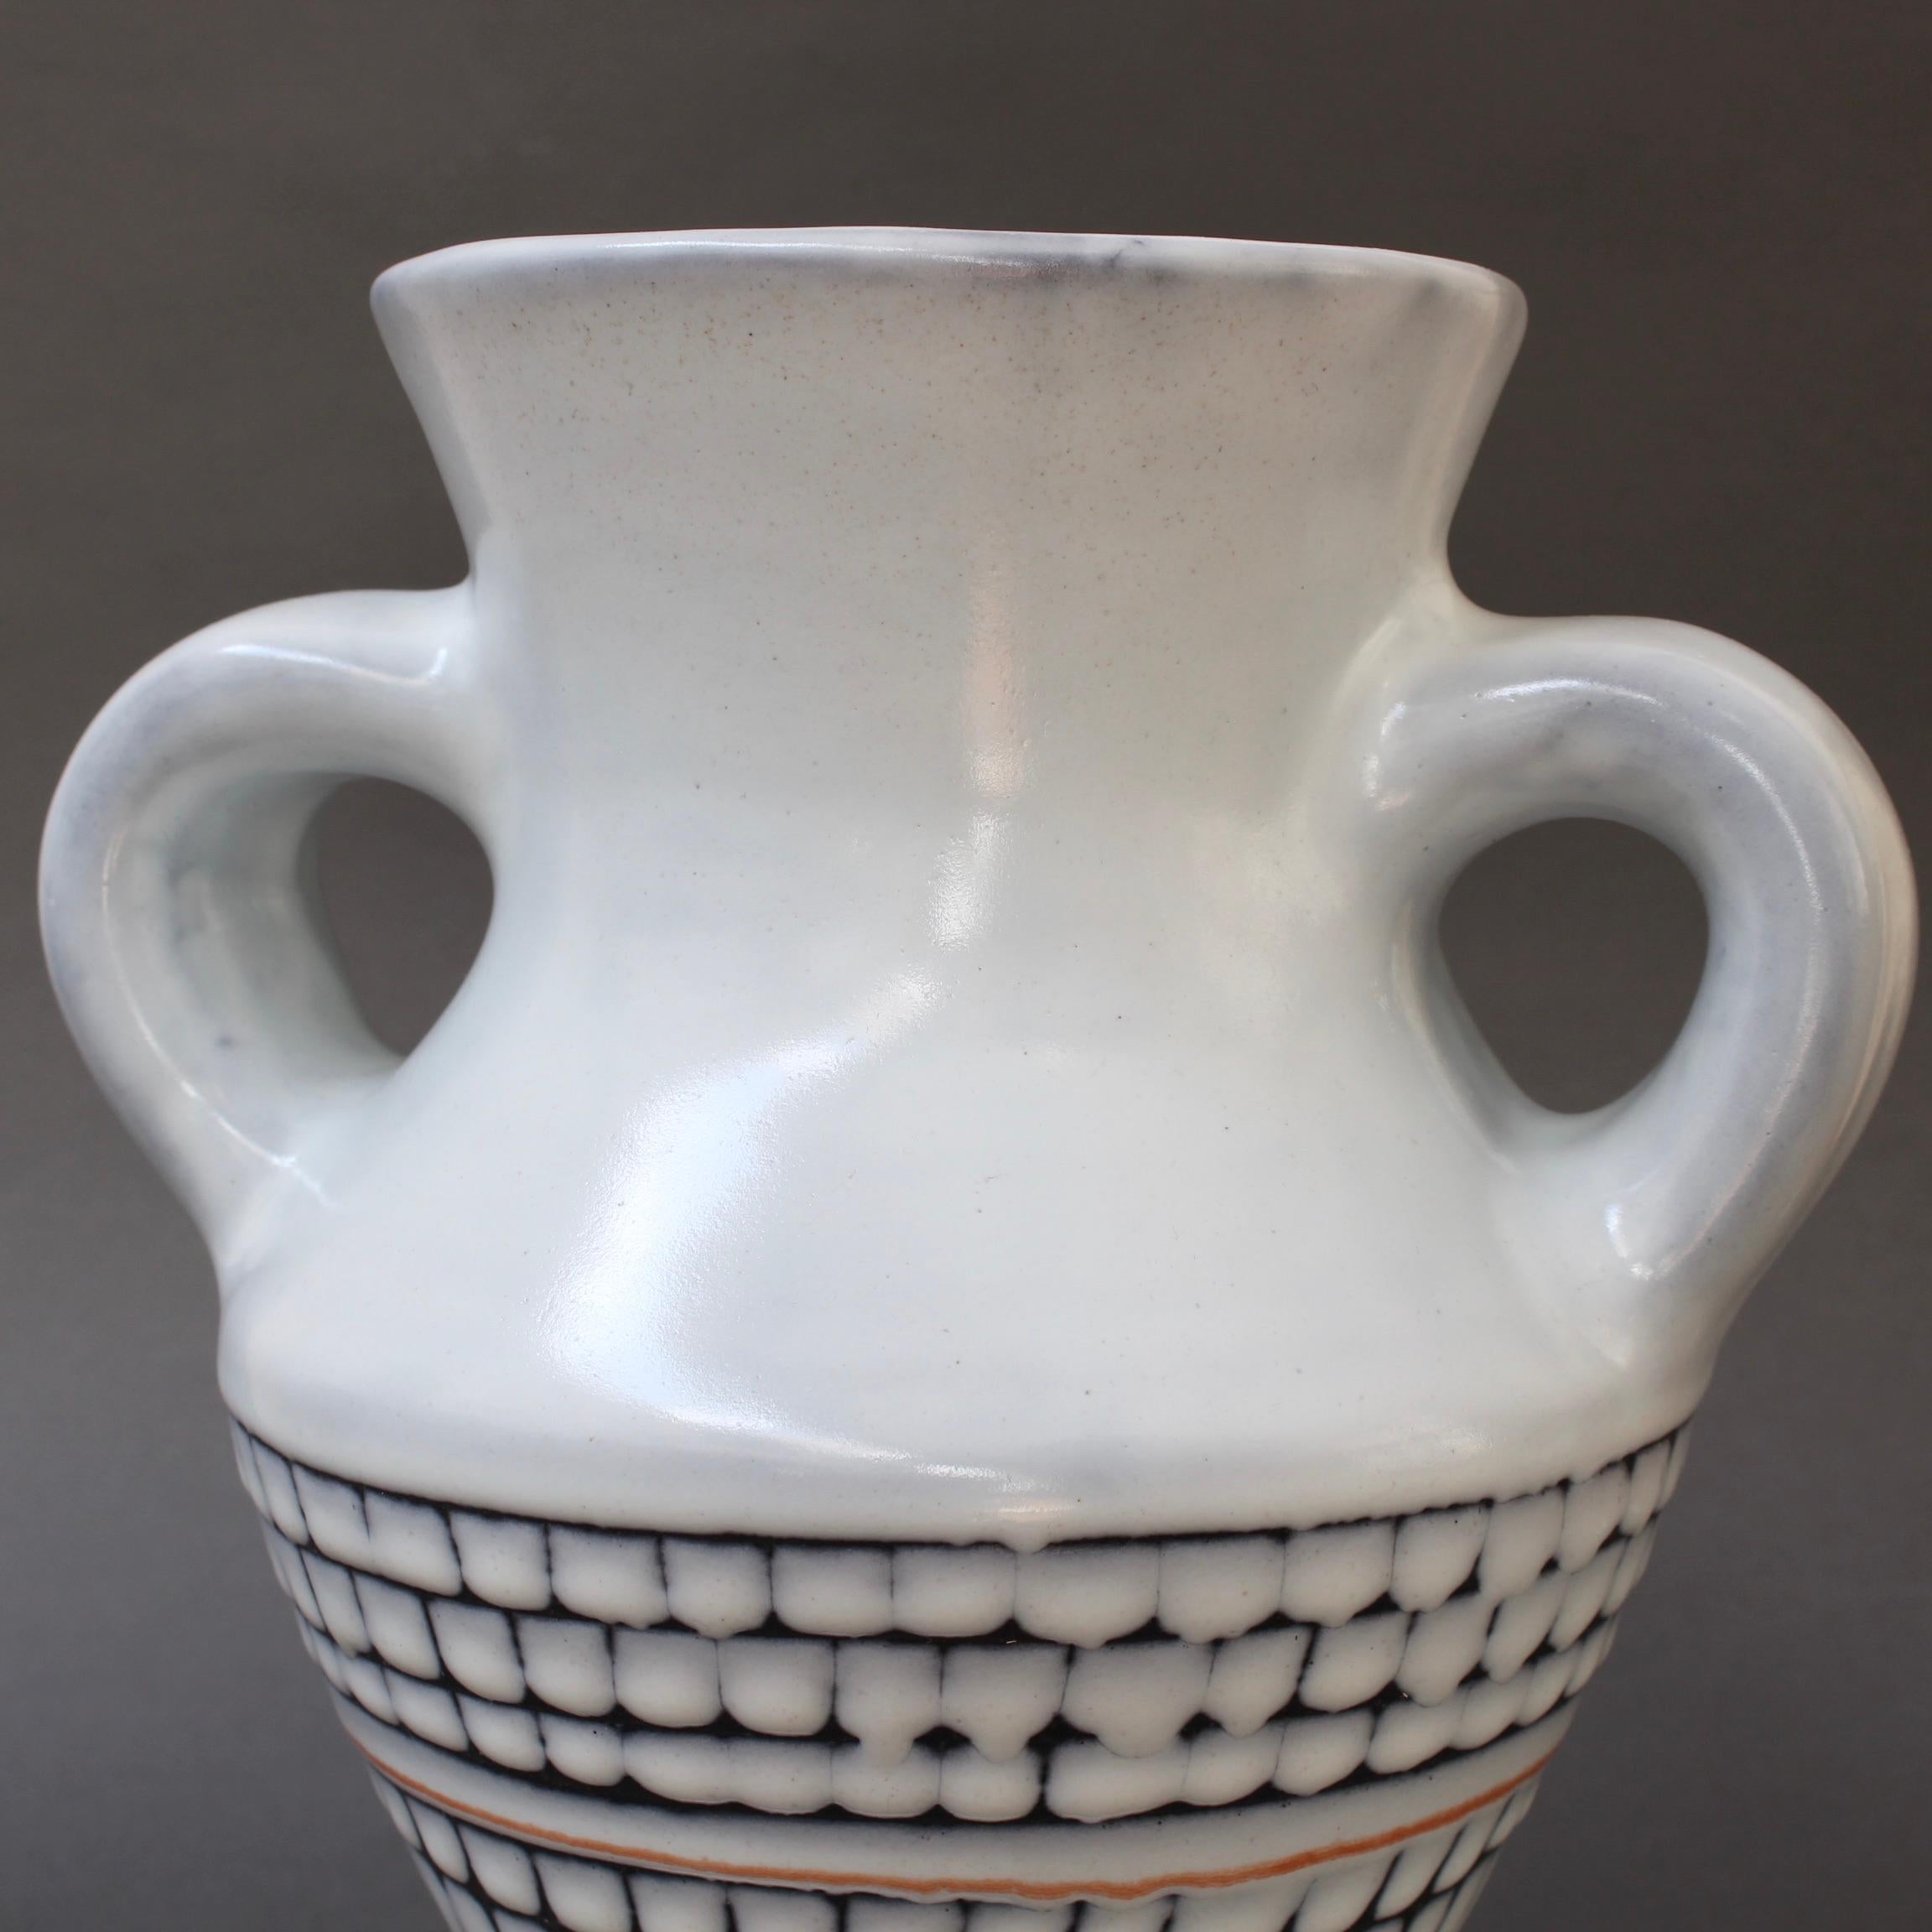 Vintage French Ceramic Vase with Handles by Roger Capron, 'circa 1950s' For Sale 11